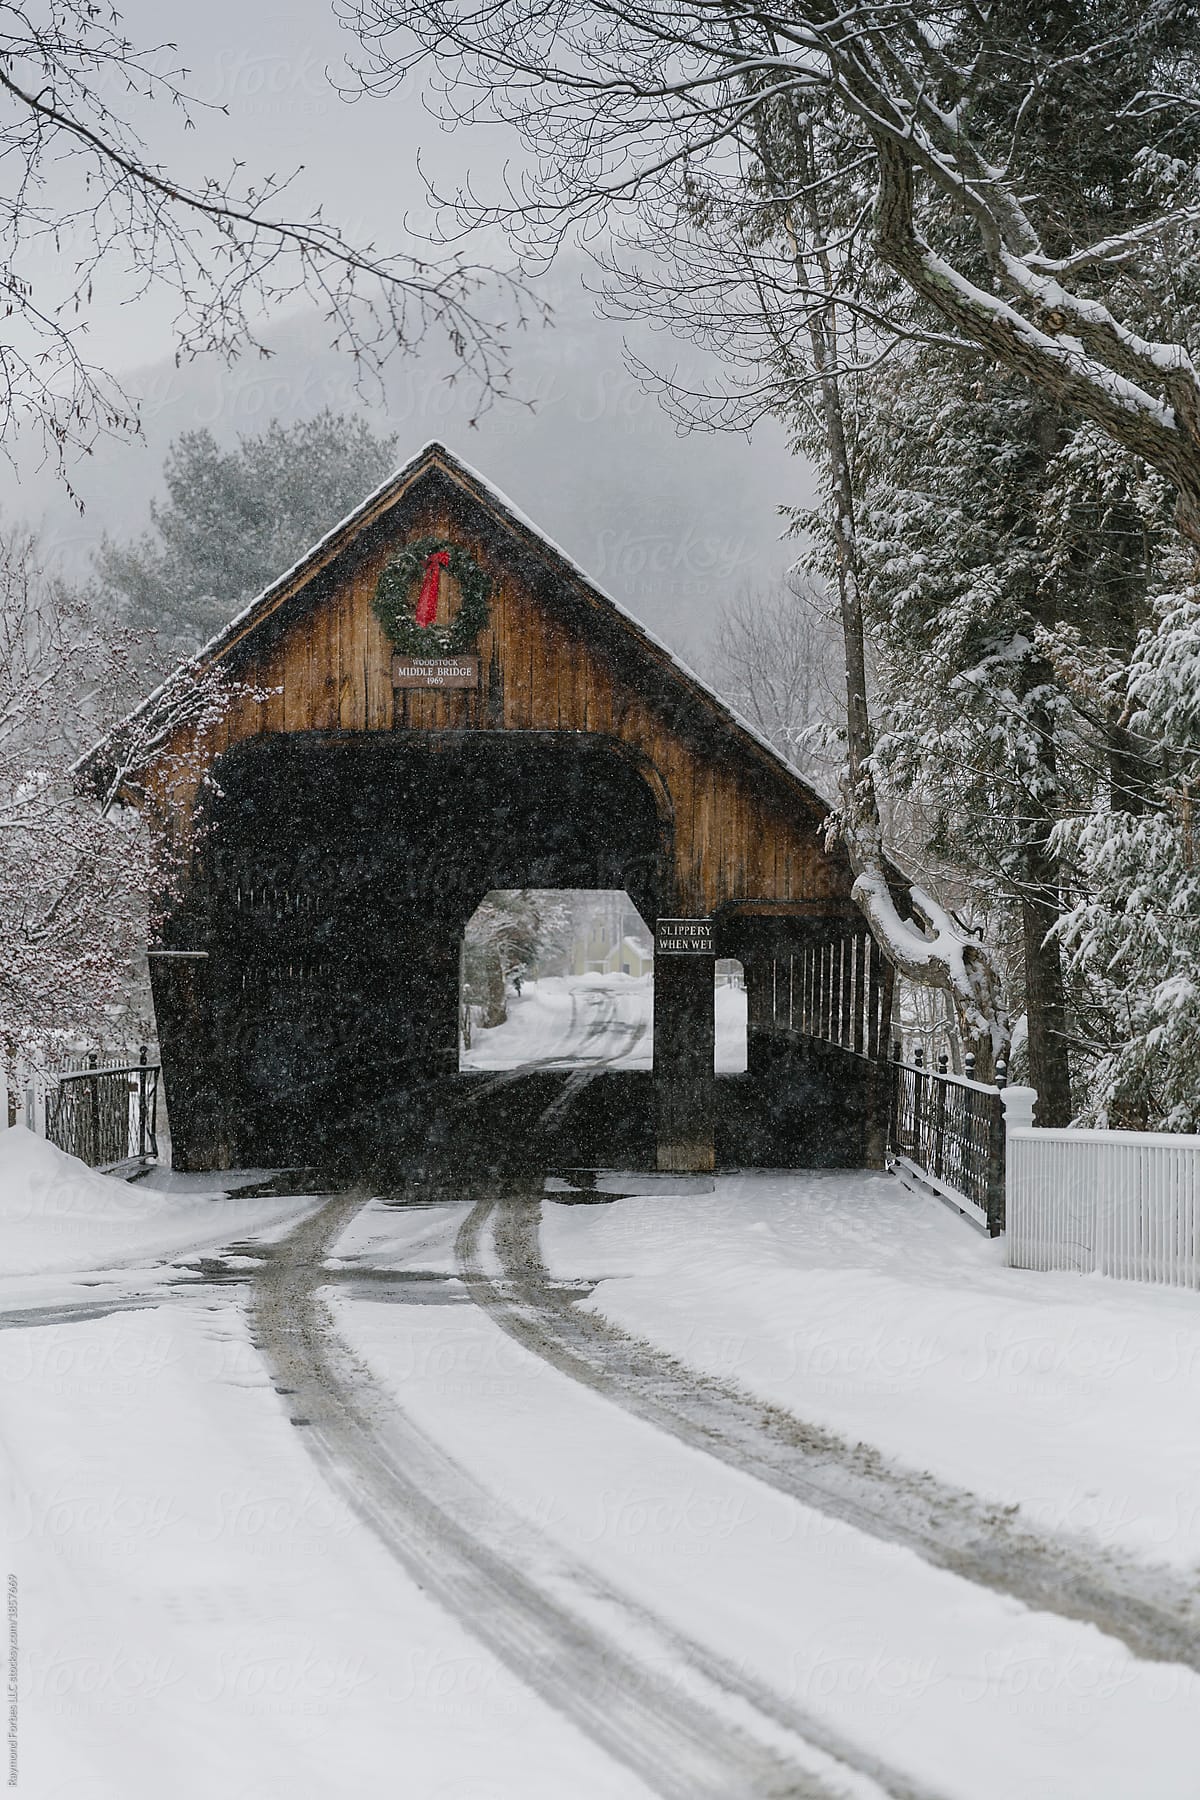 Covered Bridge Woodstock Vermont In Winter by Raymond Forbes Photography, Covered